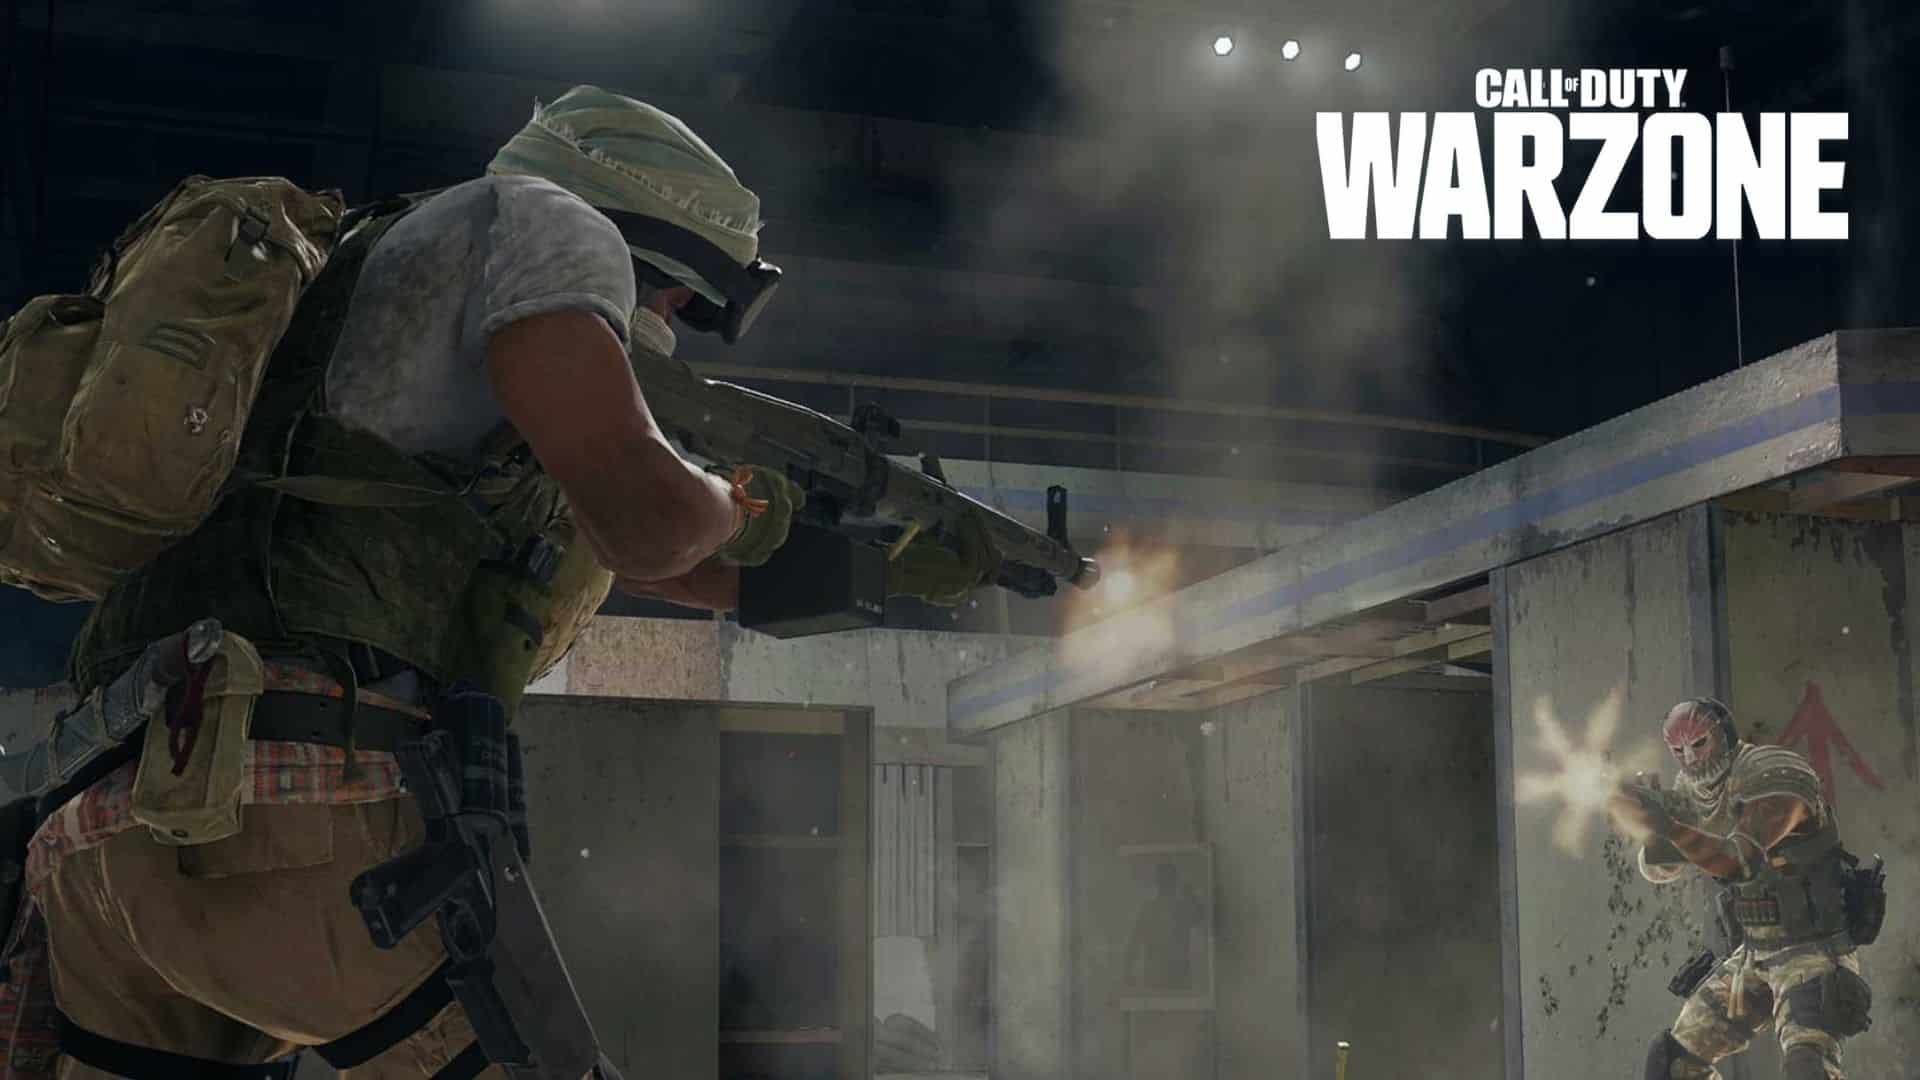 Warzone's hijacked gulag with players fighting